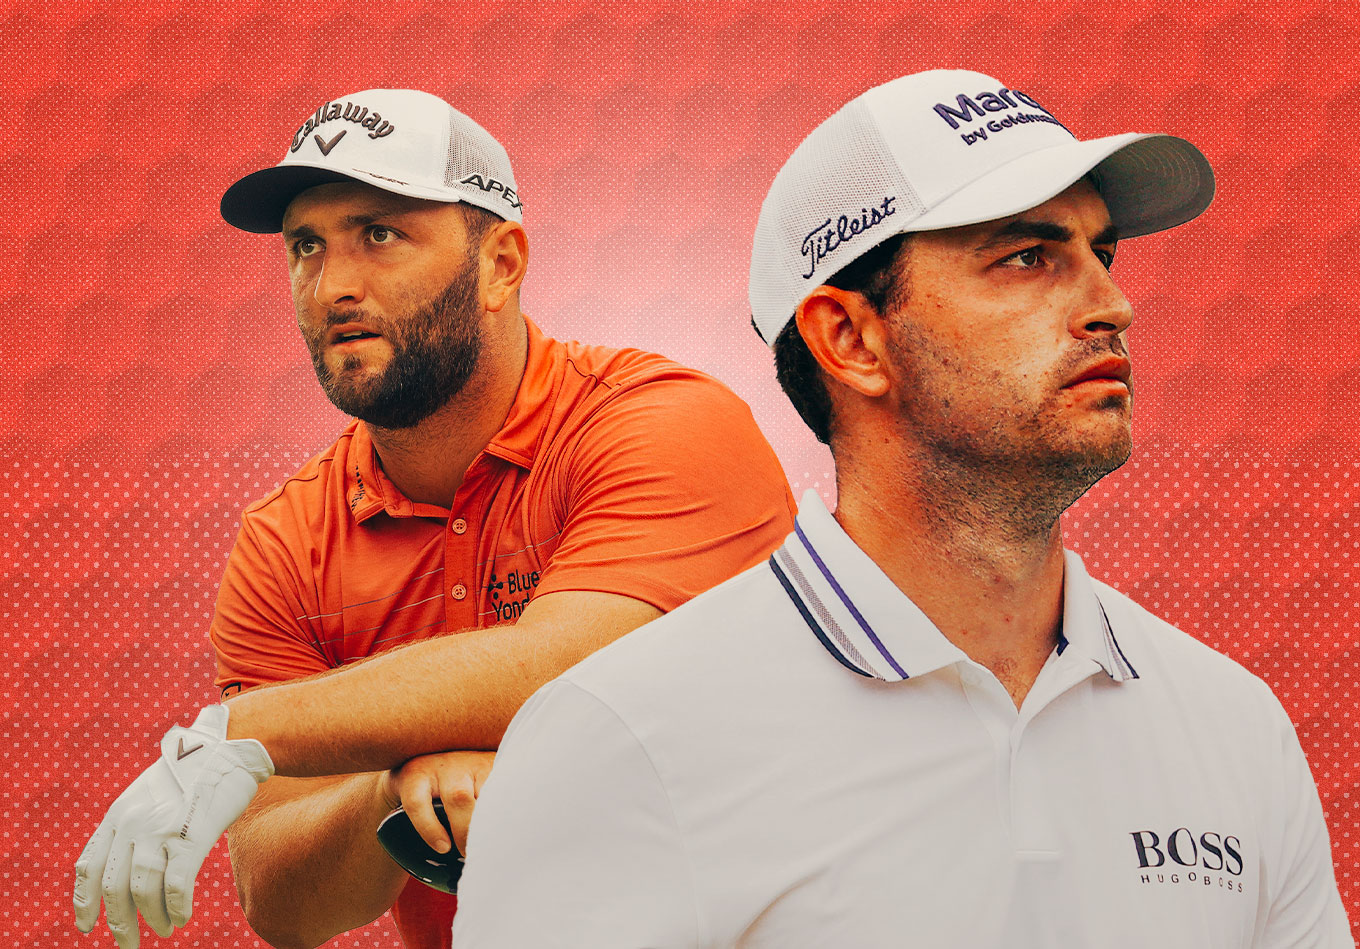 Patrick Cantlay, Jon Rahm Lead the Chase for $15 Million at The Tour Championship